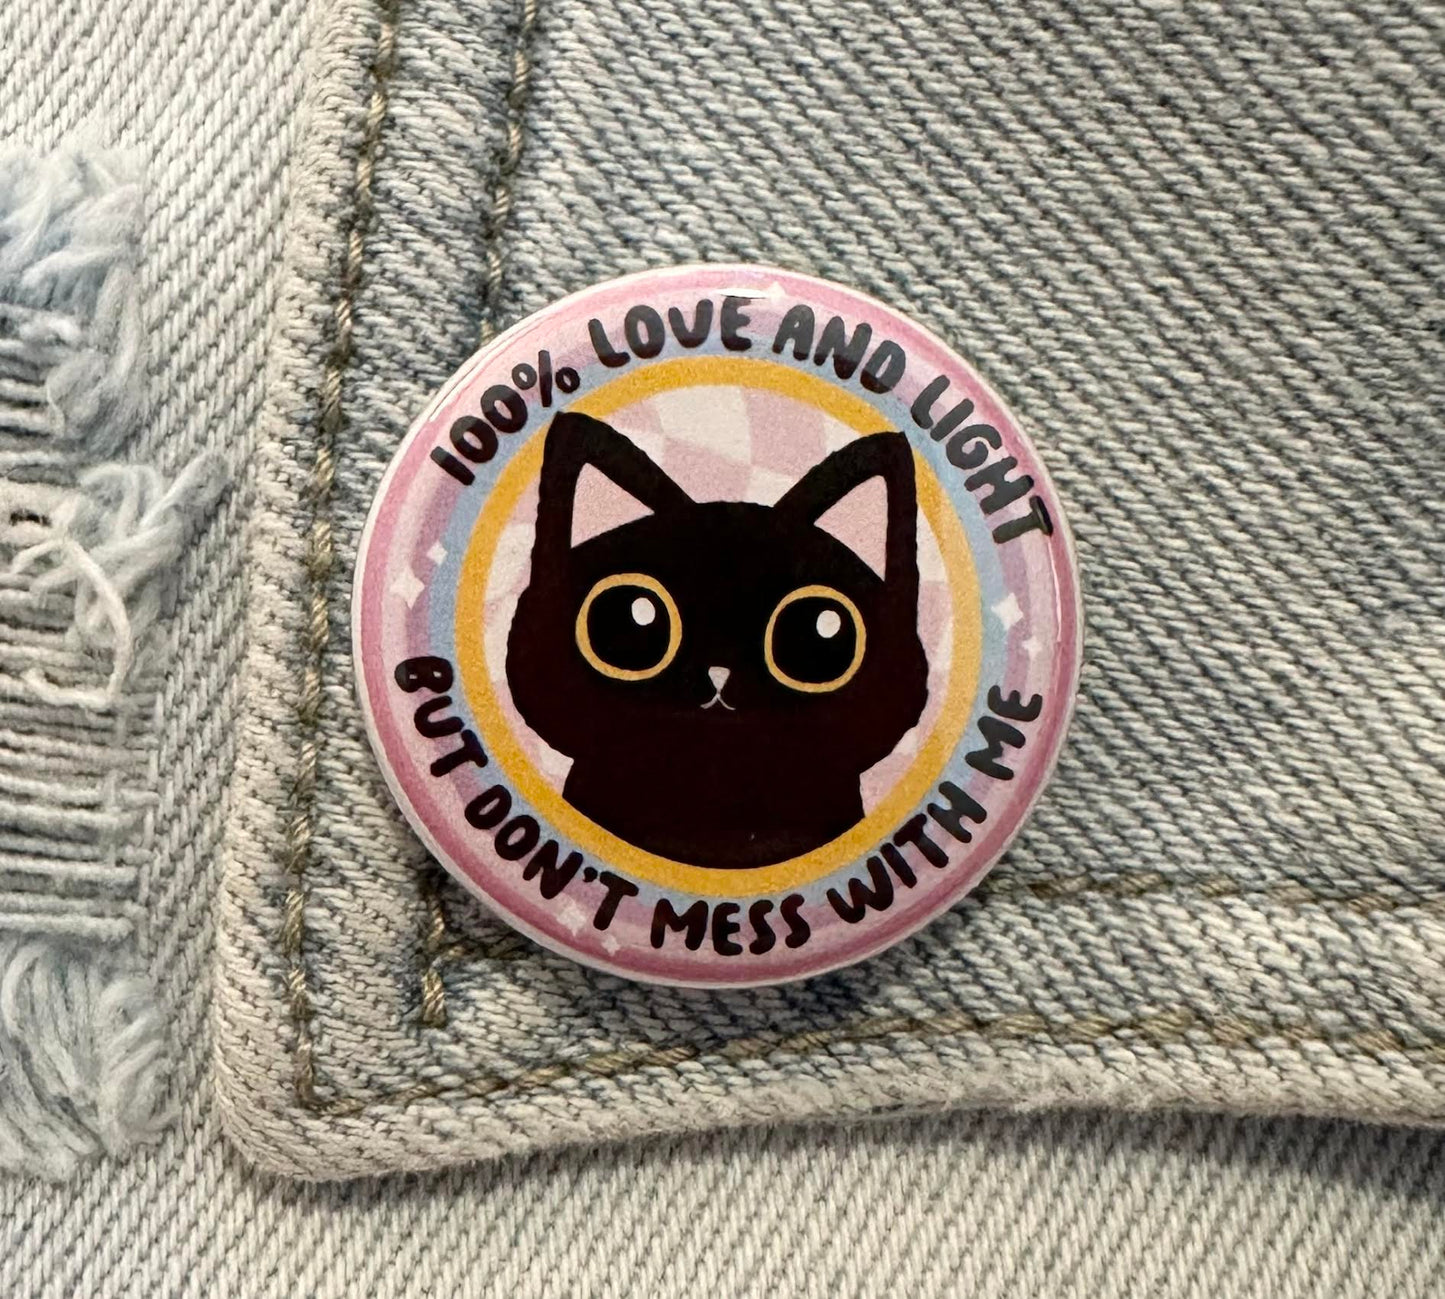 100% Love And Light But Don't Mess With Me Button